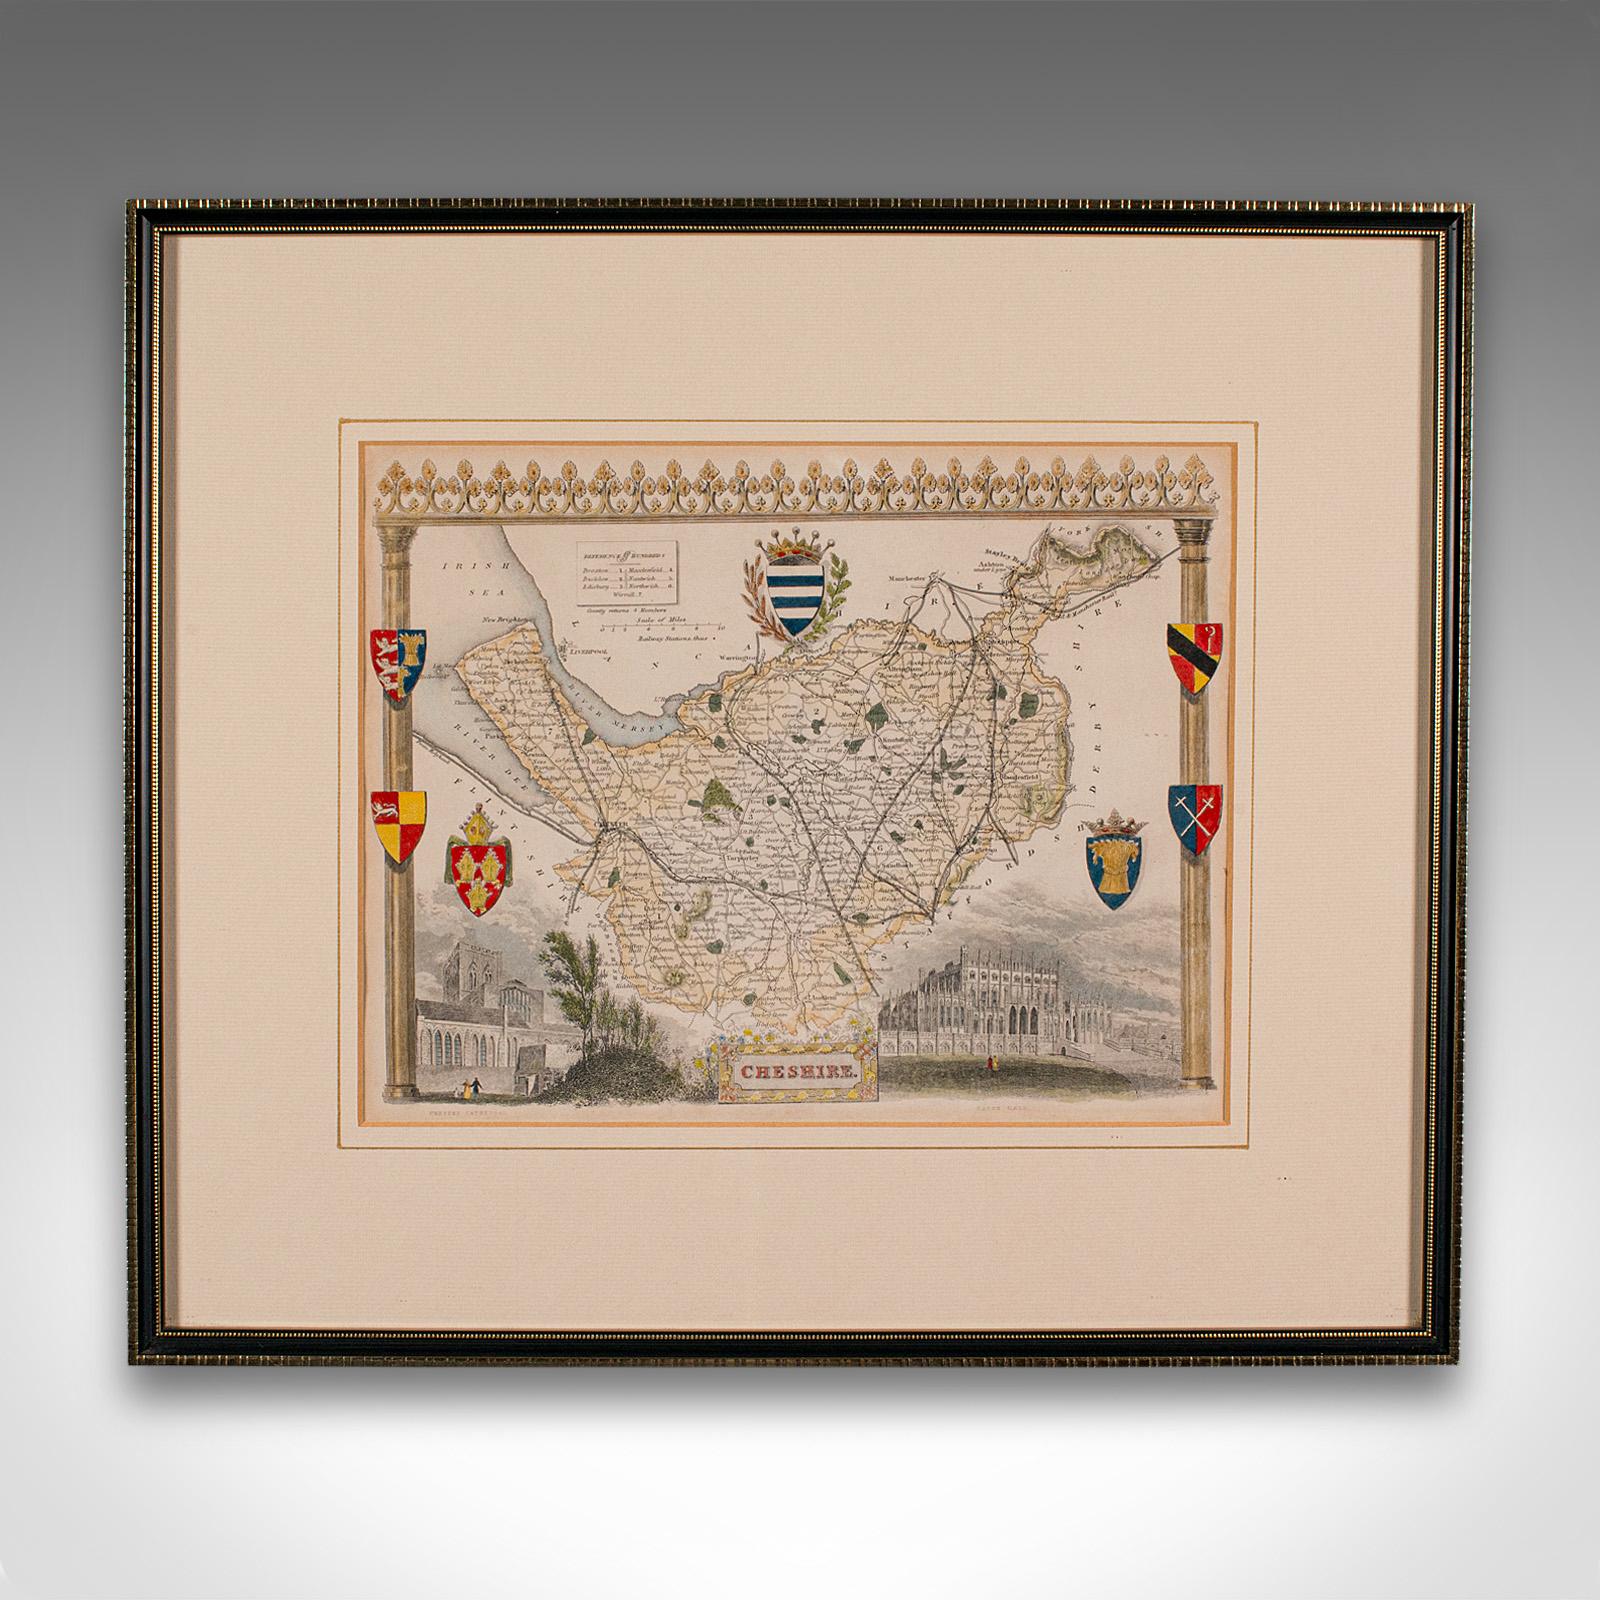 This is an antique lithography map of Cheshire. An English, framed atlas engraving of cartographic interest, dating to the mid 19th century and later.

Superb lithography of Cheshire and its county detail, perfect for display
Displaying a desirable